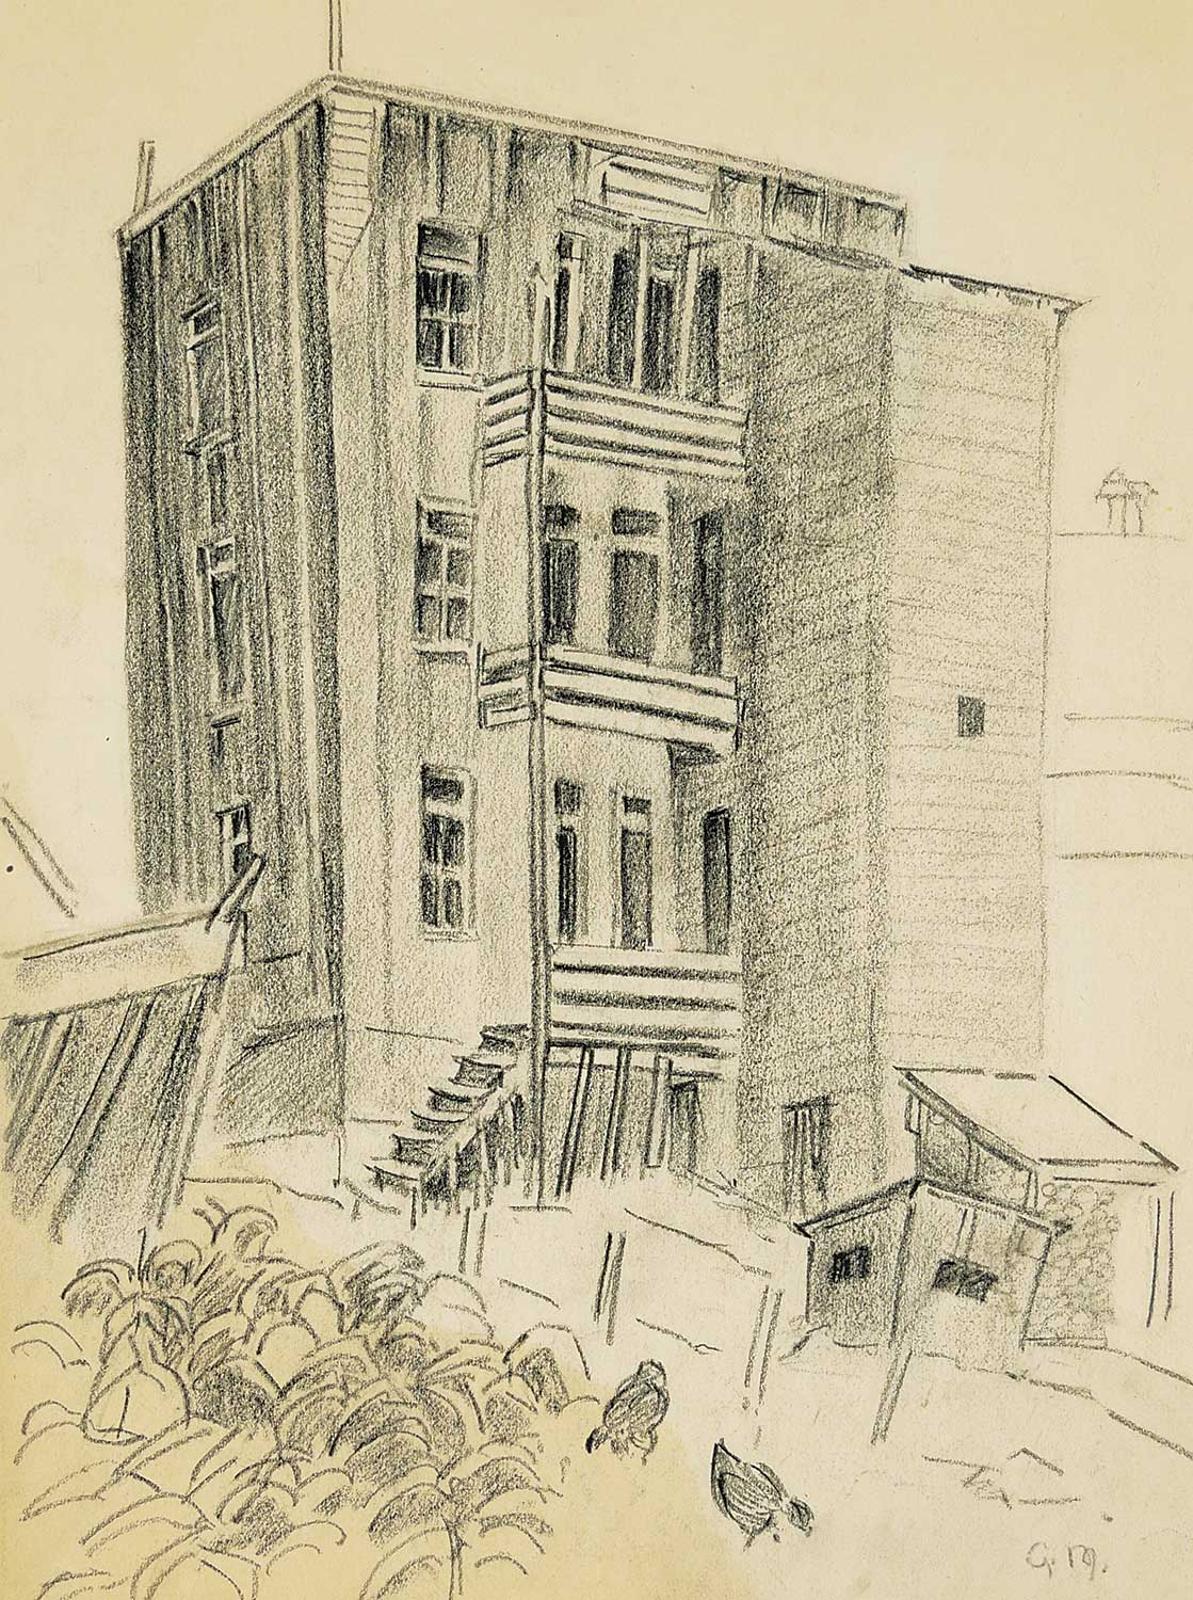 Gladys Eleanor Montgomery (1895-1979) - Untitled - Sketch of Behind the Building